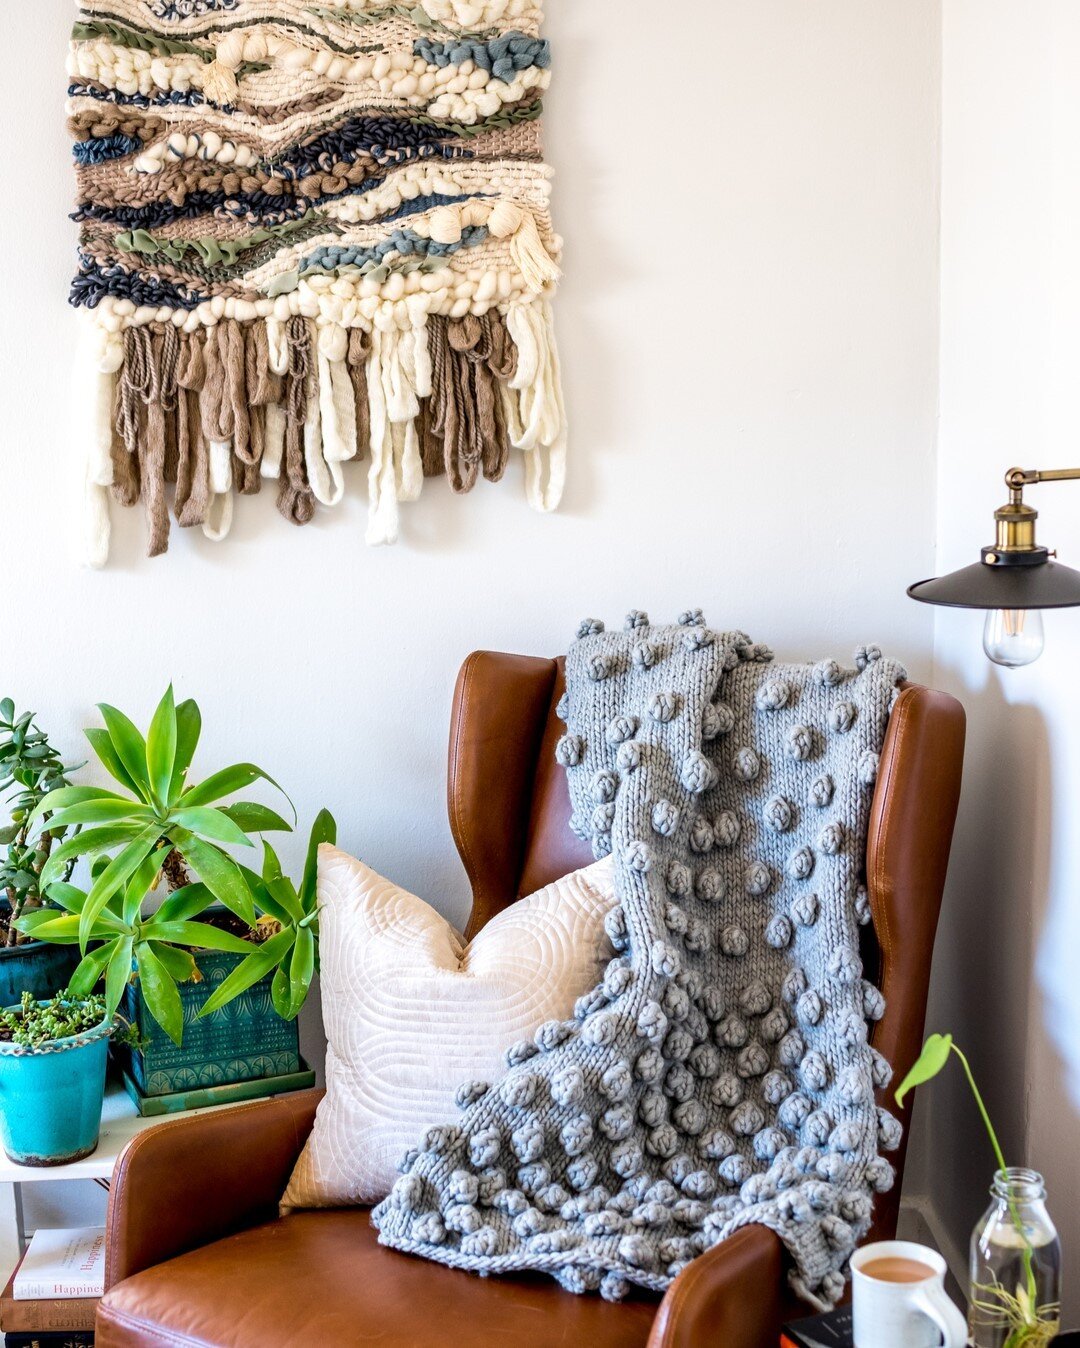 This weaving by @beccaboojane was inspired by an ocean storm. When I look it I can almost smell the salt spray and hear the rumble of surf. I feel like I'm home. Also, I *finally* finished the falling bobble afghan (pattern @purlsoho @purlsohobusyhan